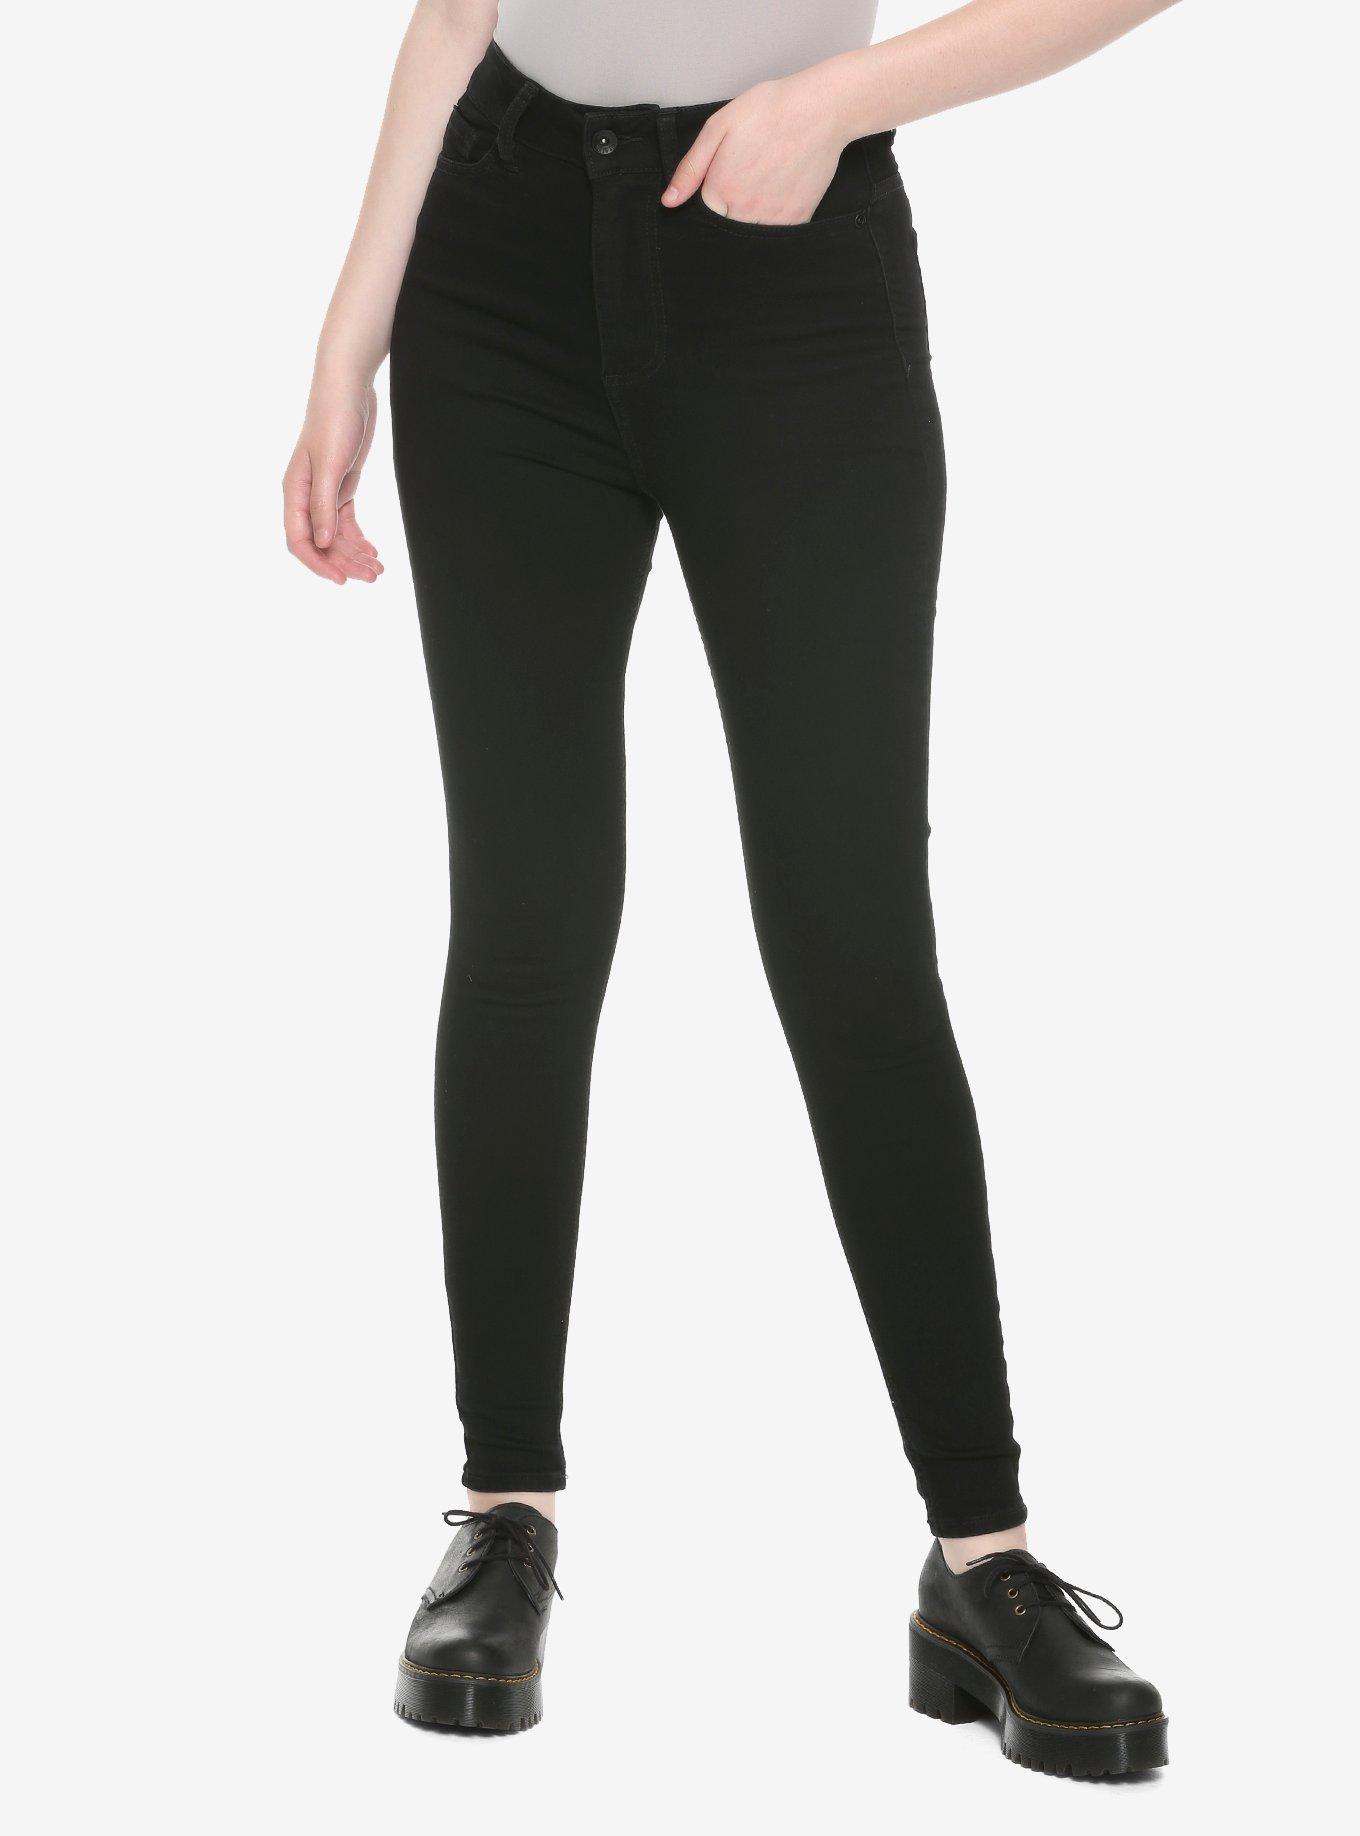 Stylish & Hot black jeggings at Affordable Prices 